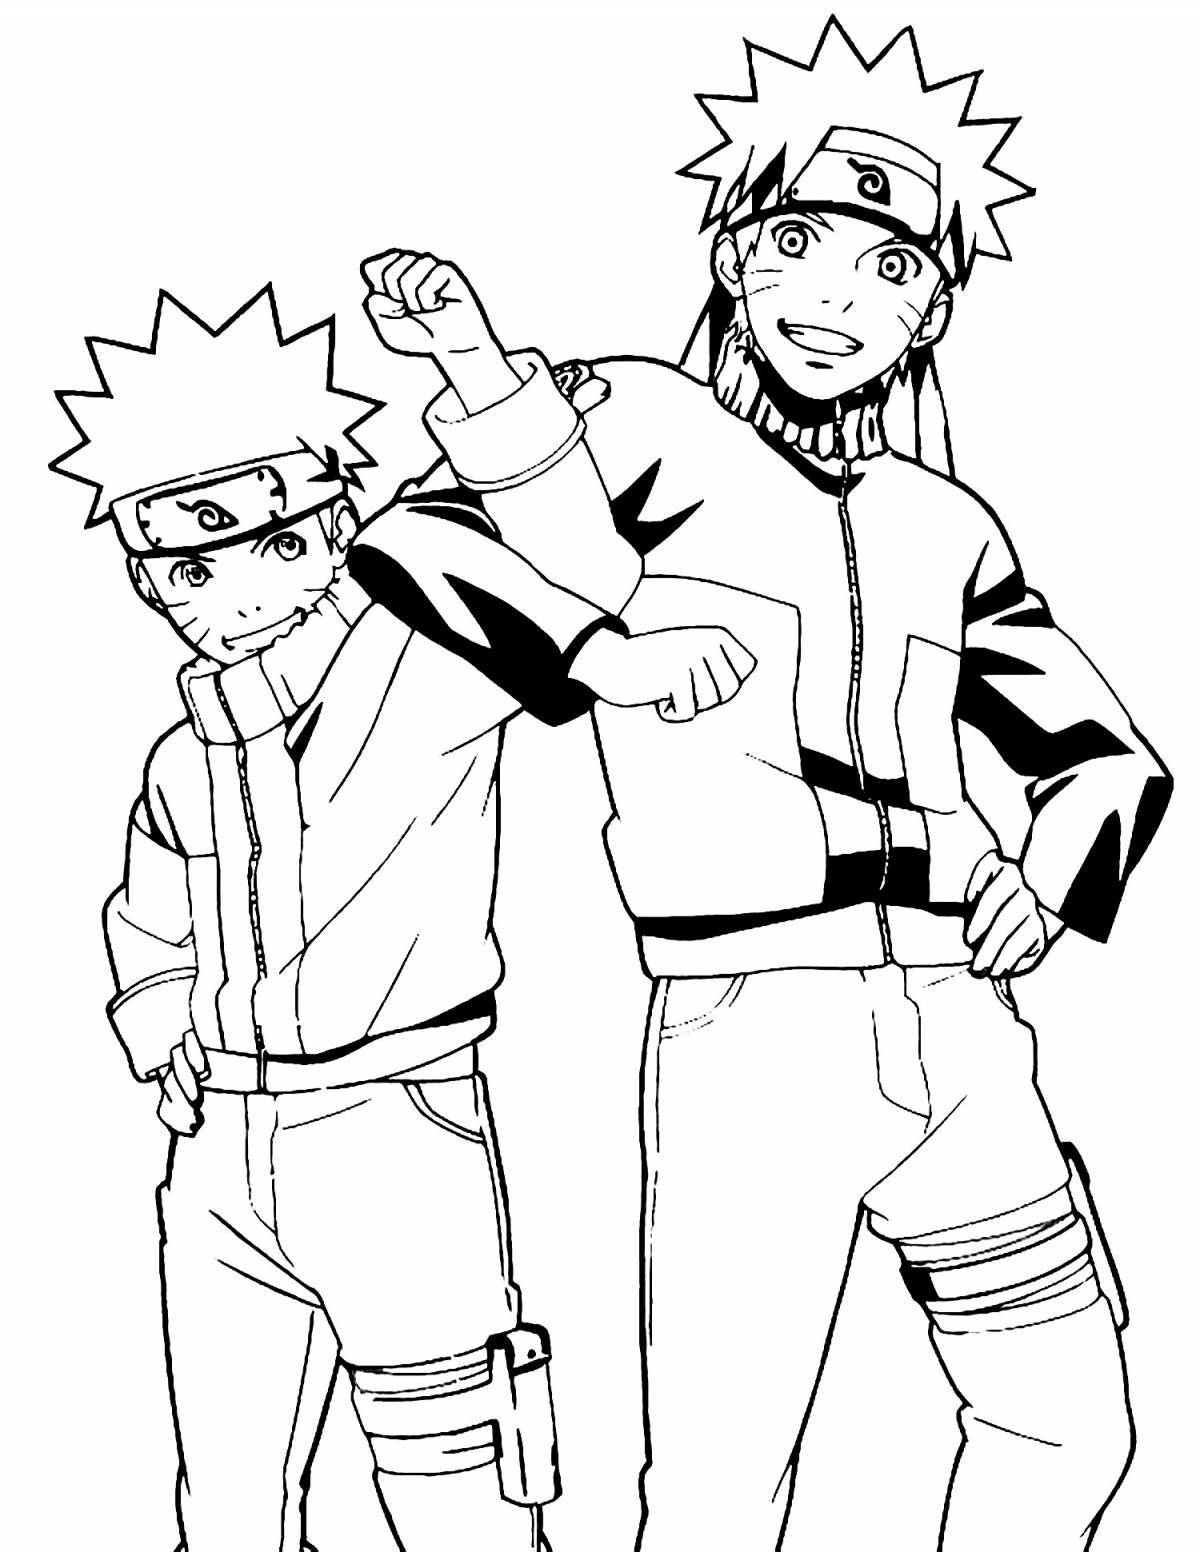 Playful naruto coloring page for kids